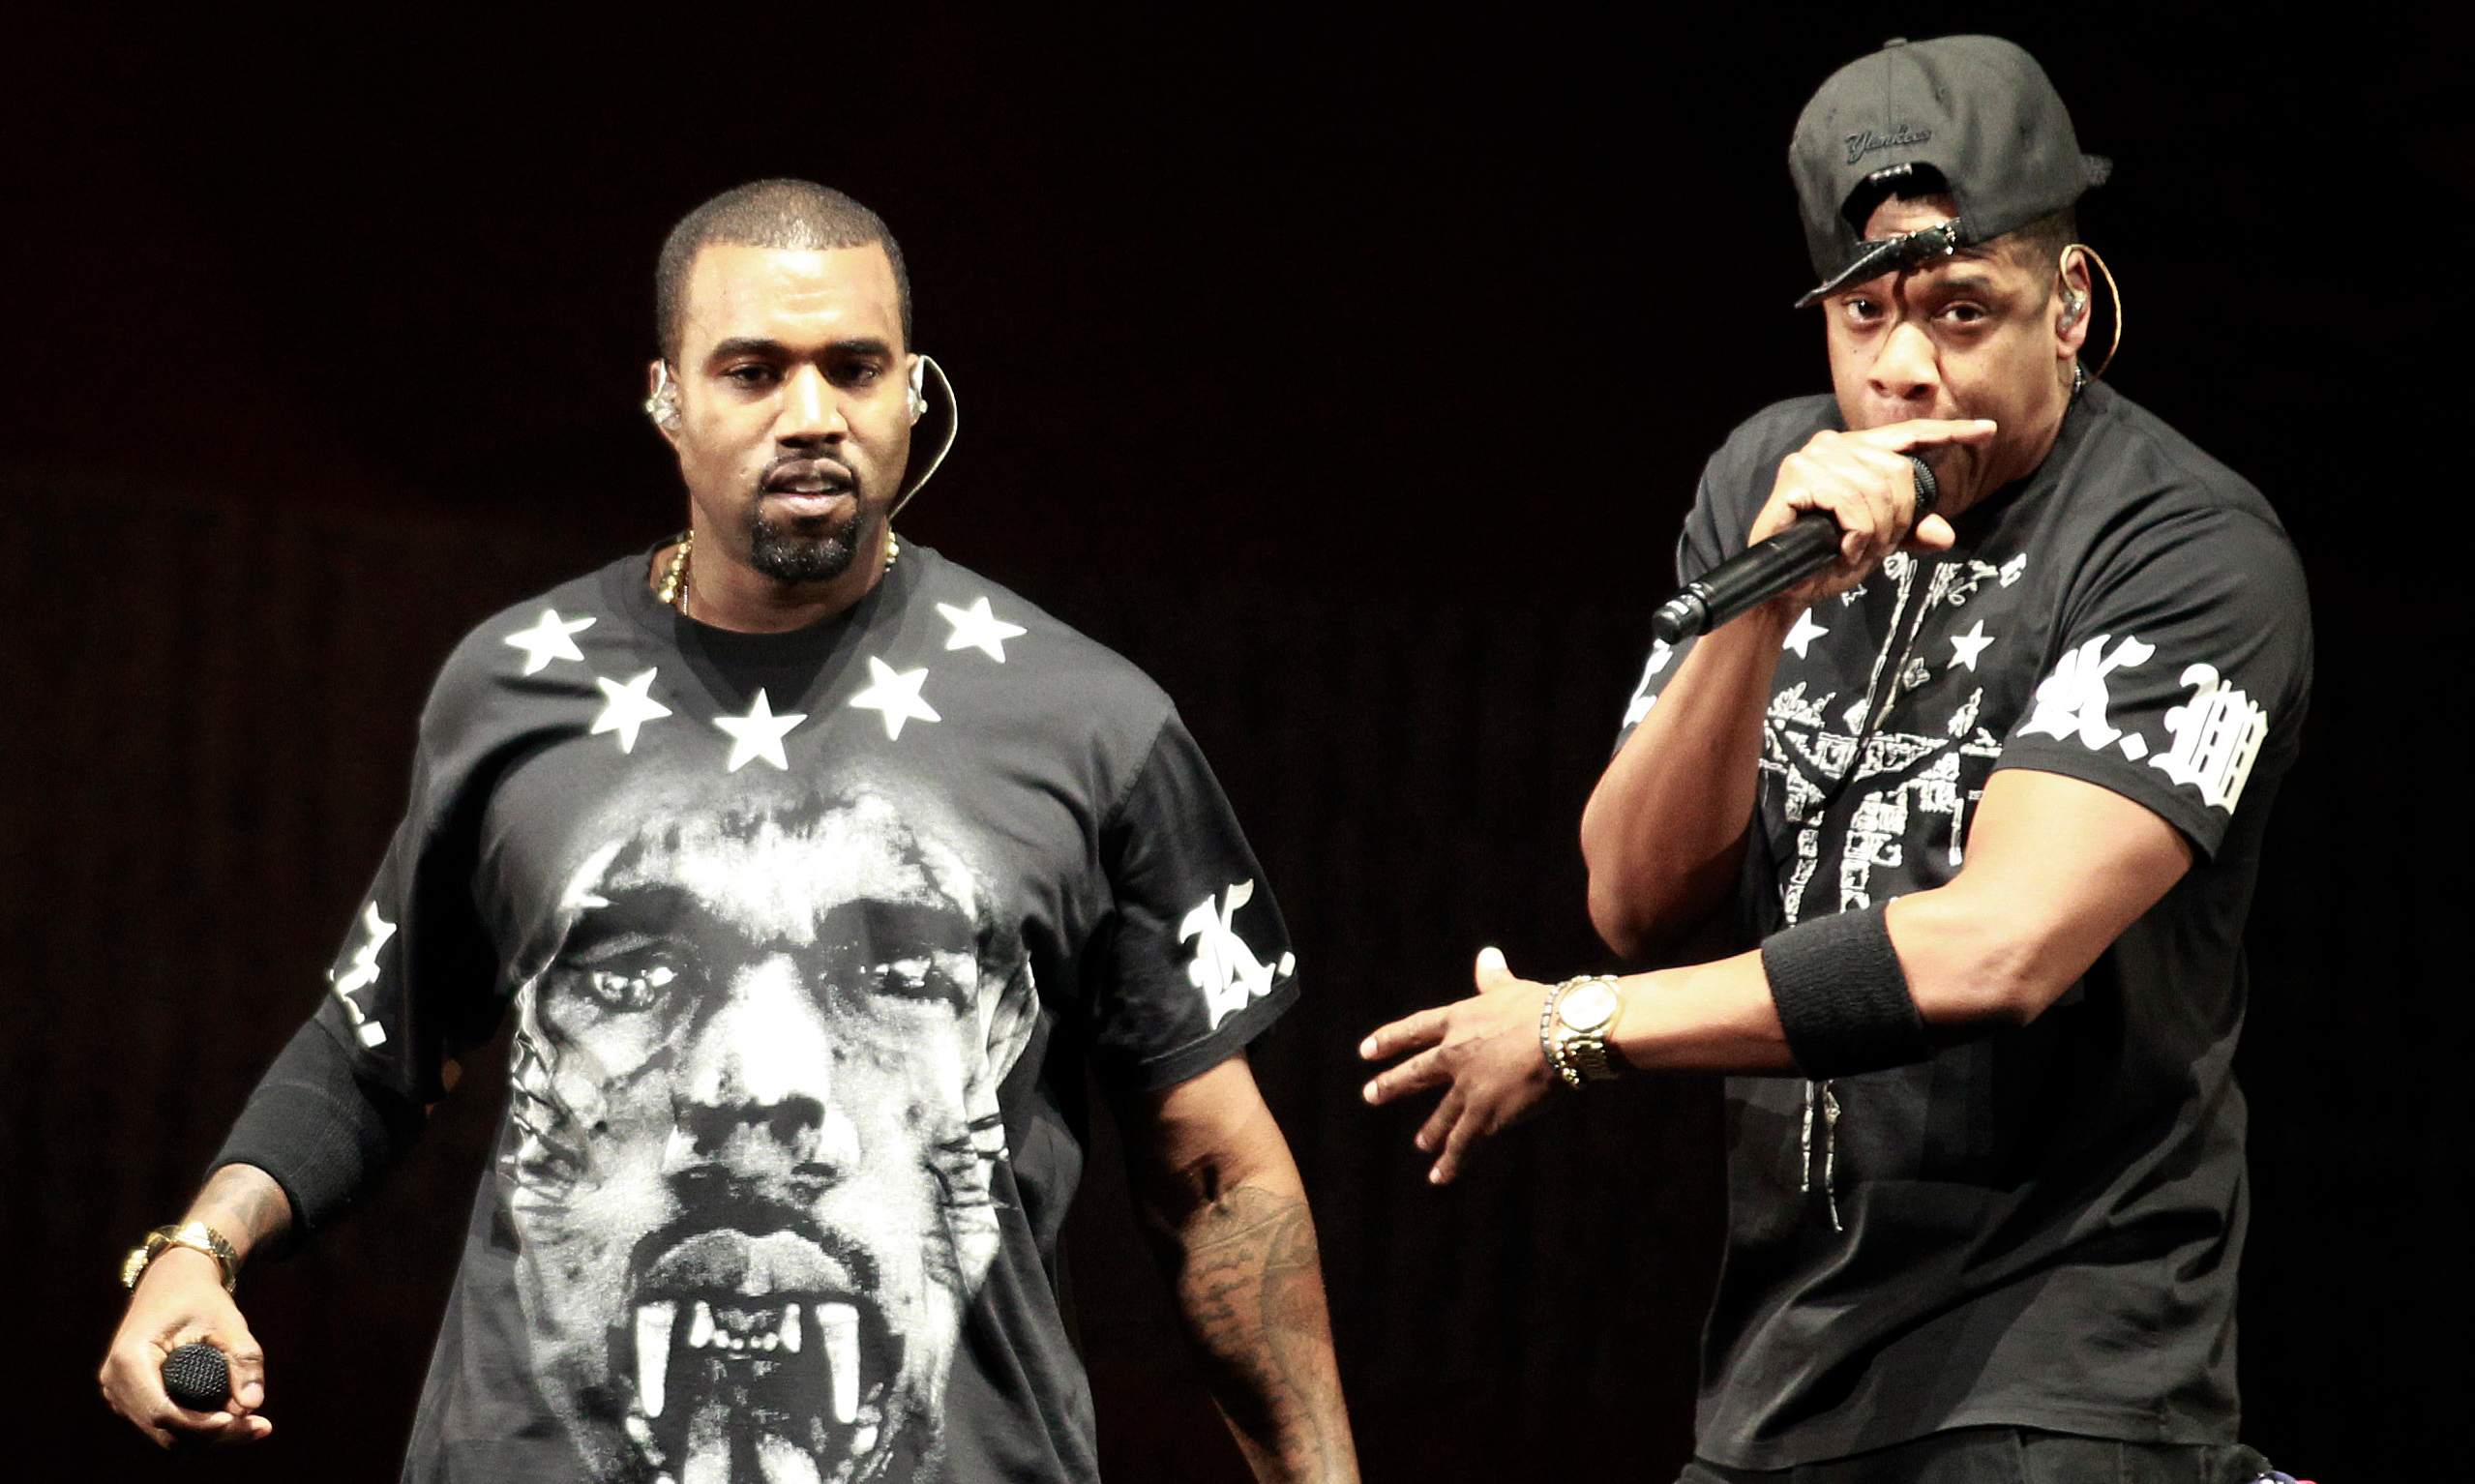 Jay Z and Kanye West will be at the LG Arena in Birmingham 2012